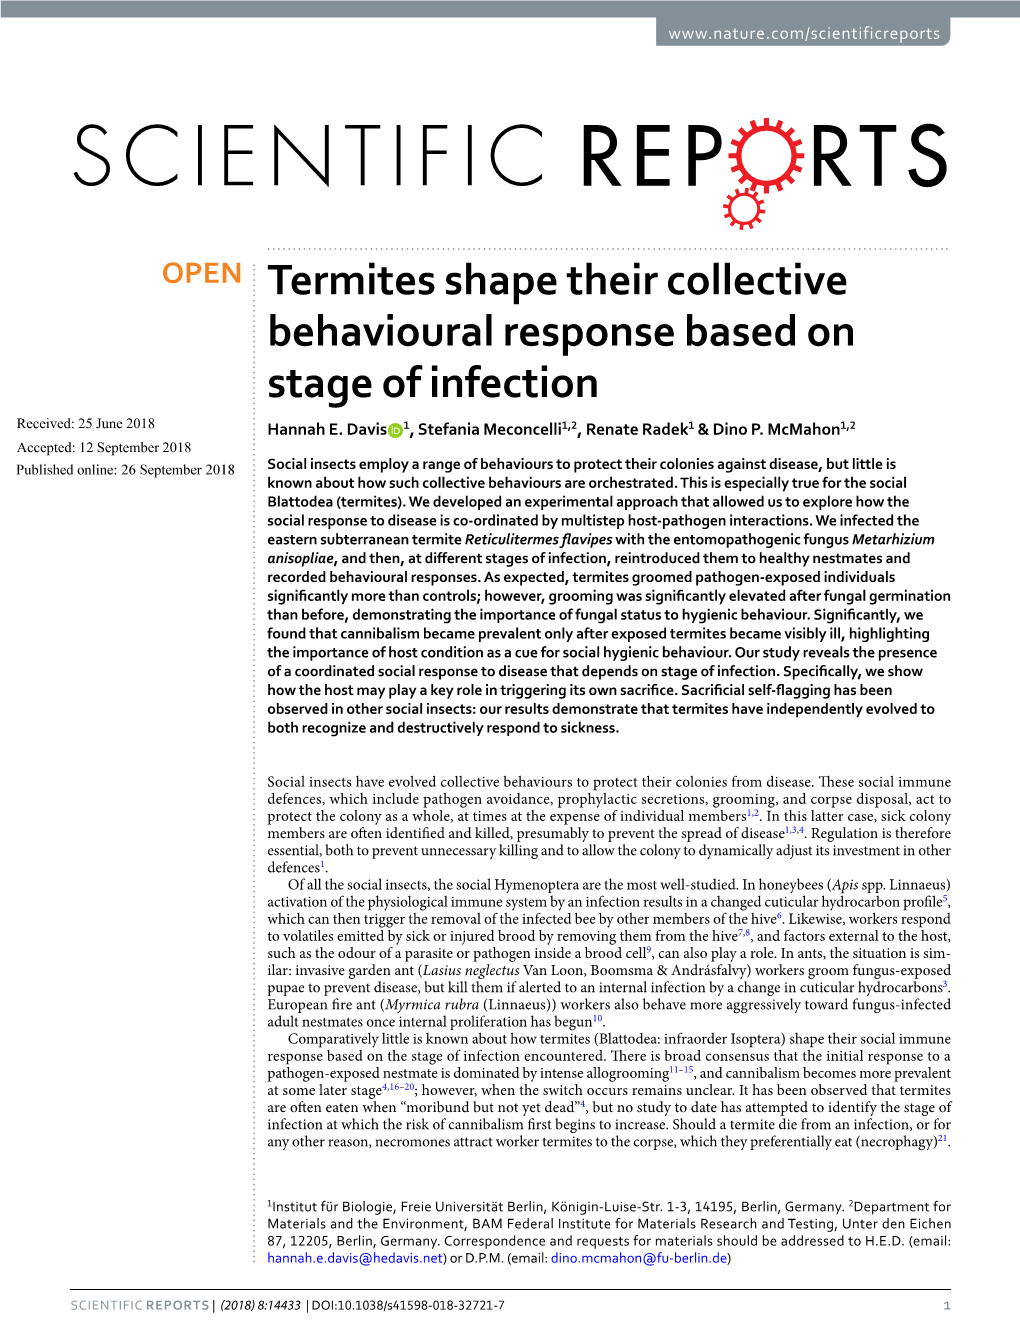 Termites Shape Their Collective Behavioural Response Based on Stage of Infection Received: 25 June 2018 Hannah E